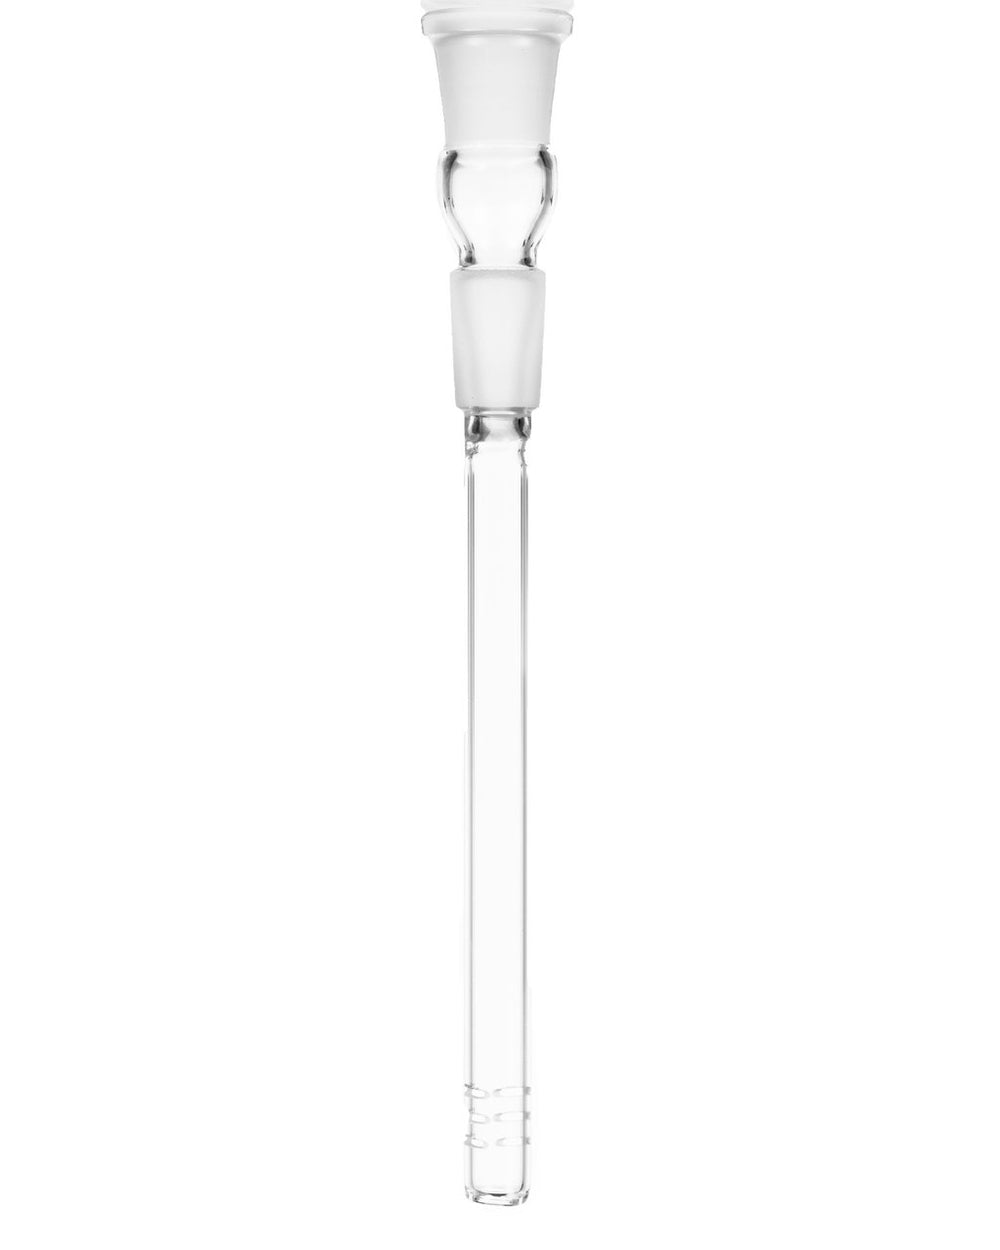 downstem and bowl BoroDirect - 18mm to 18mm Diffused Downstem